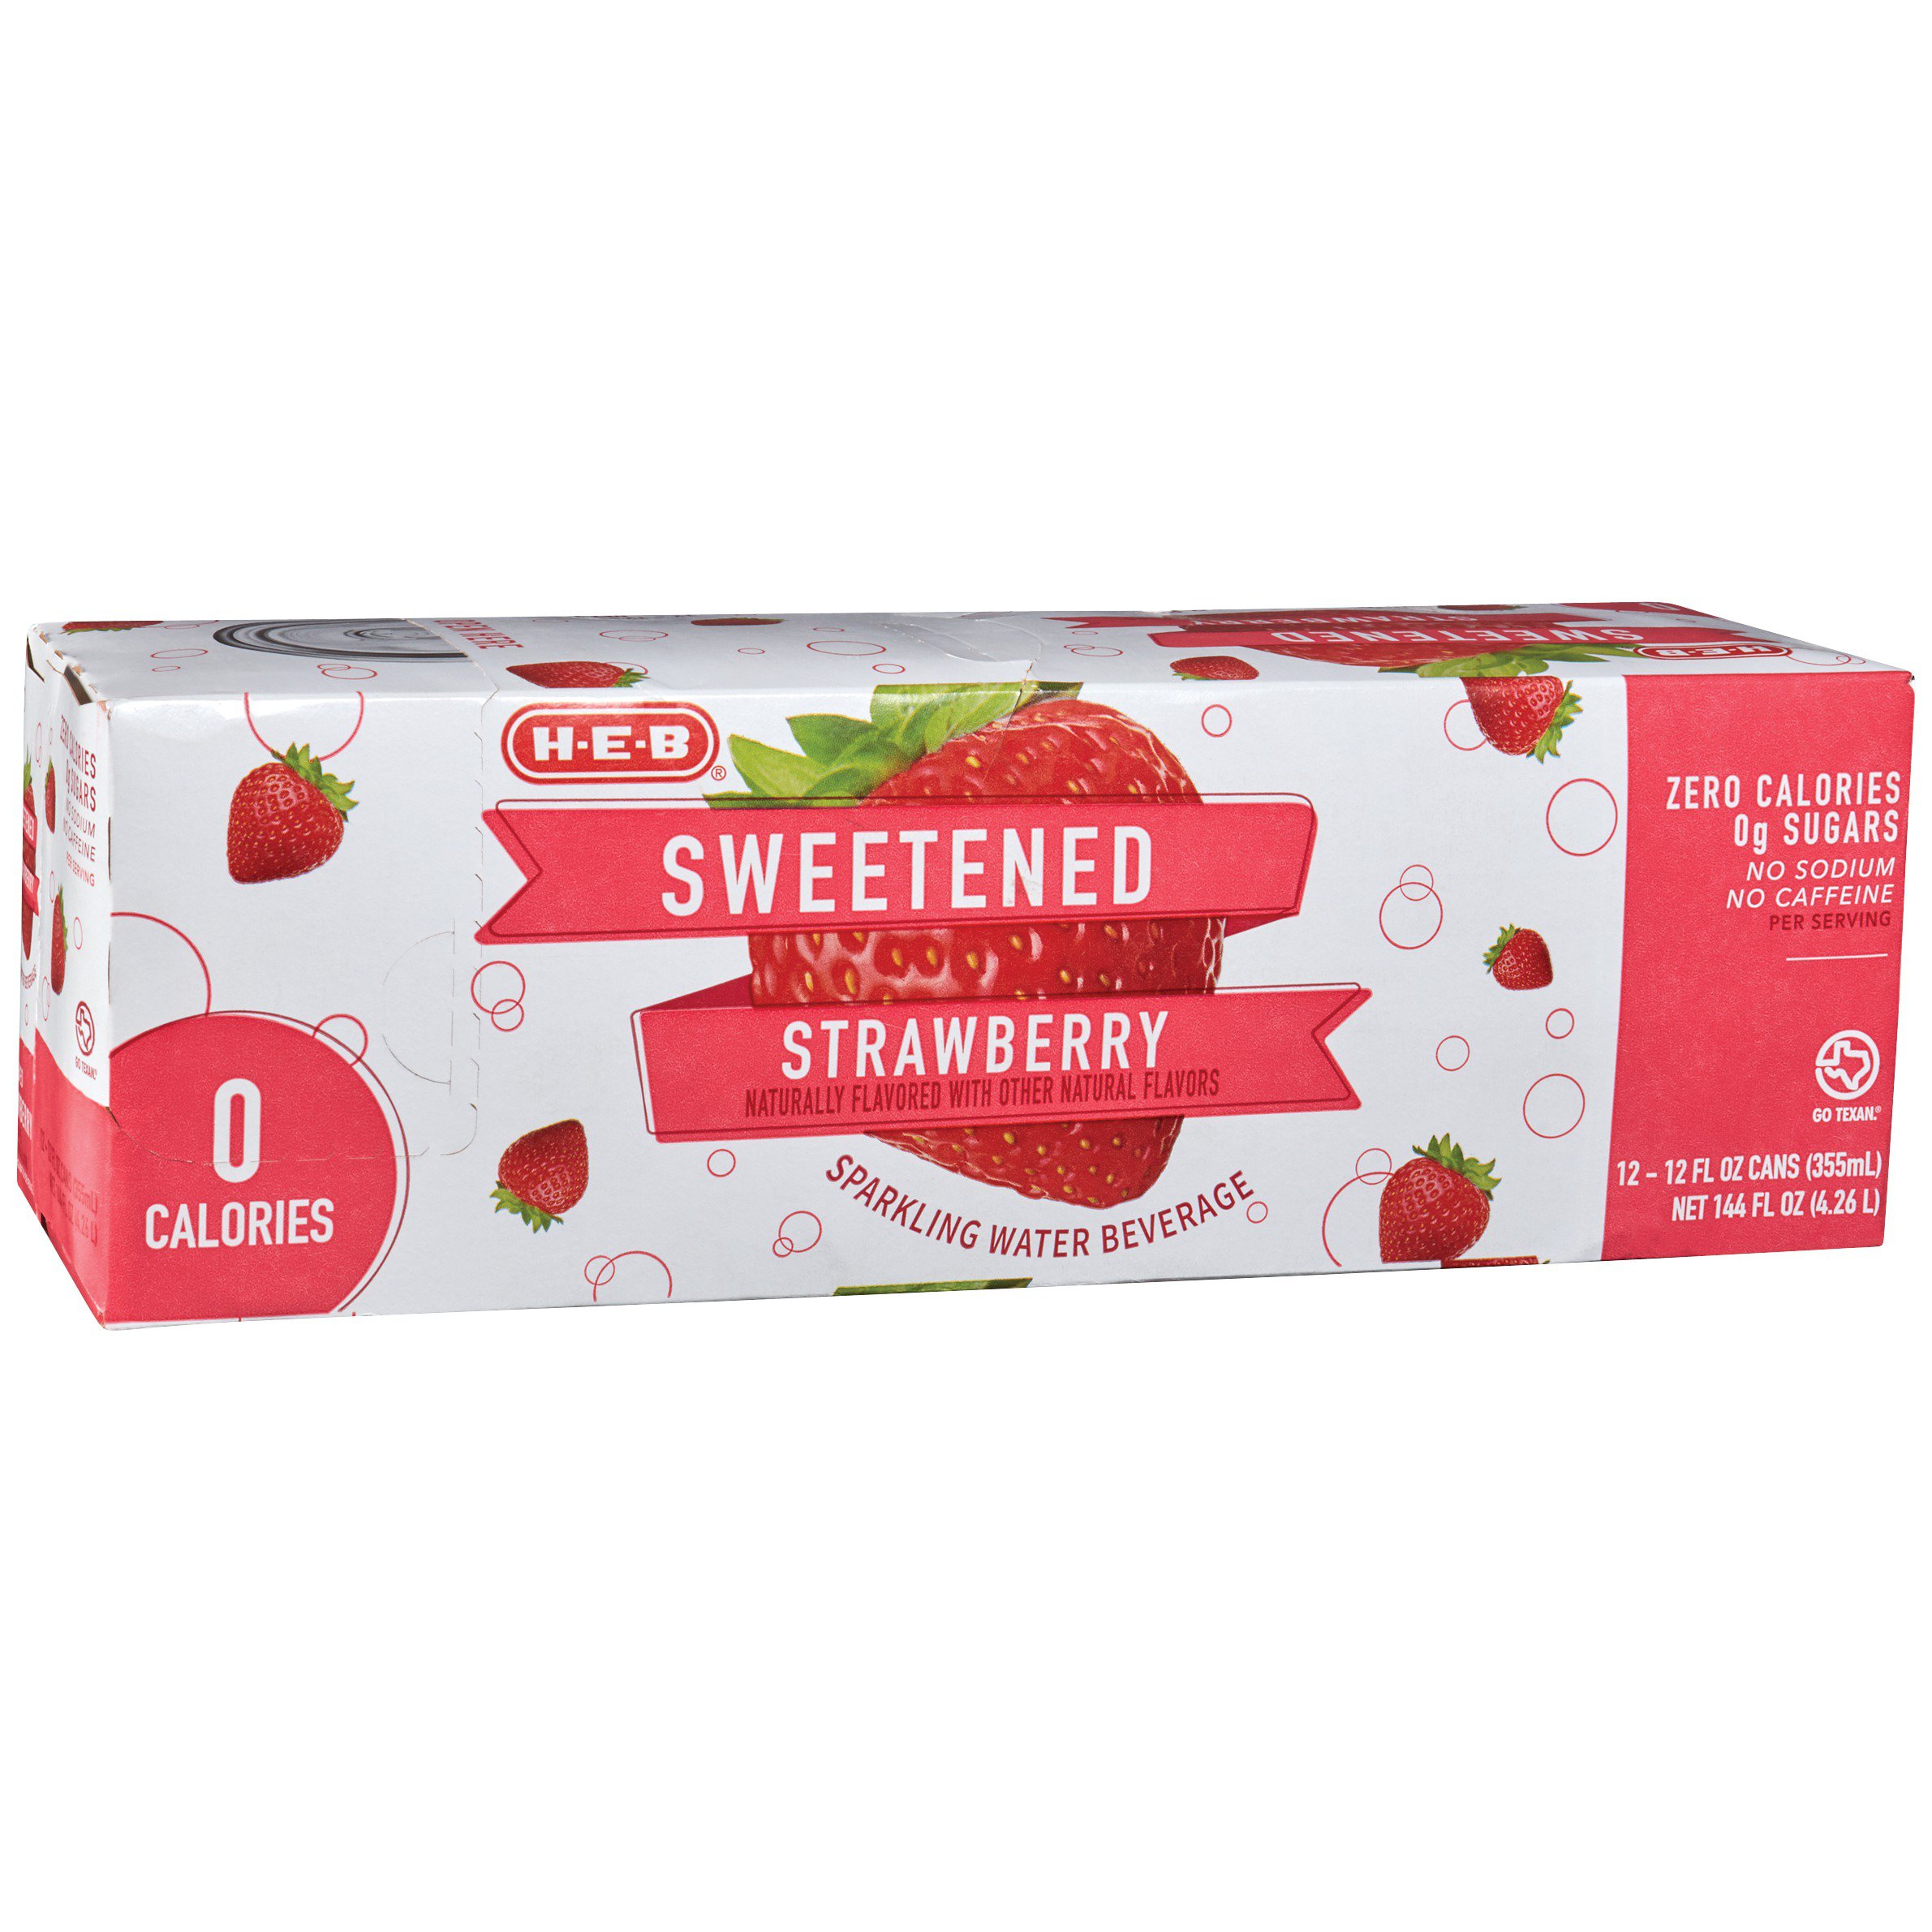 H-E-B Sweetened Strawberry Sparkling Water 12 oz Cans - Shop Water at H-E-B